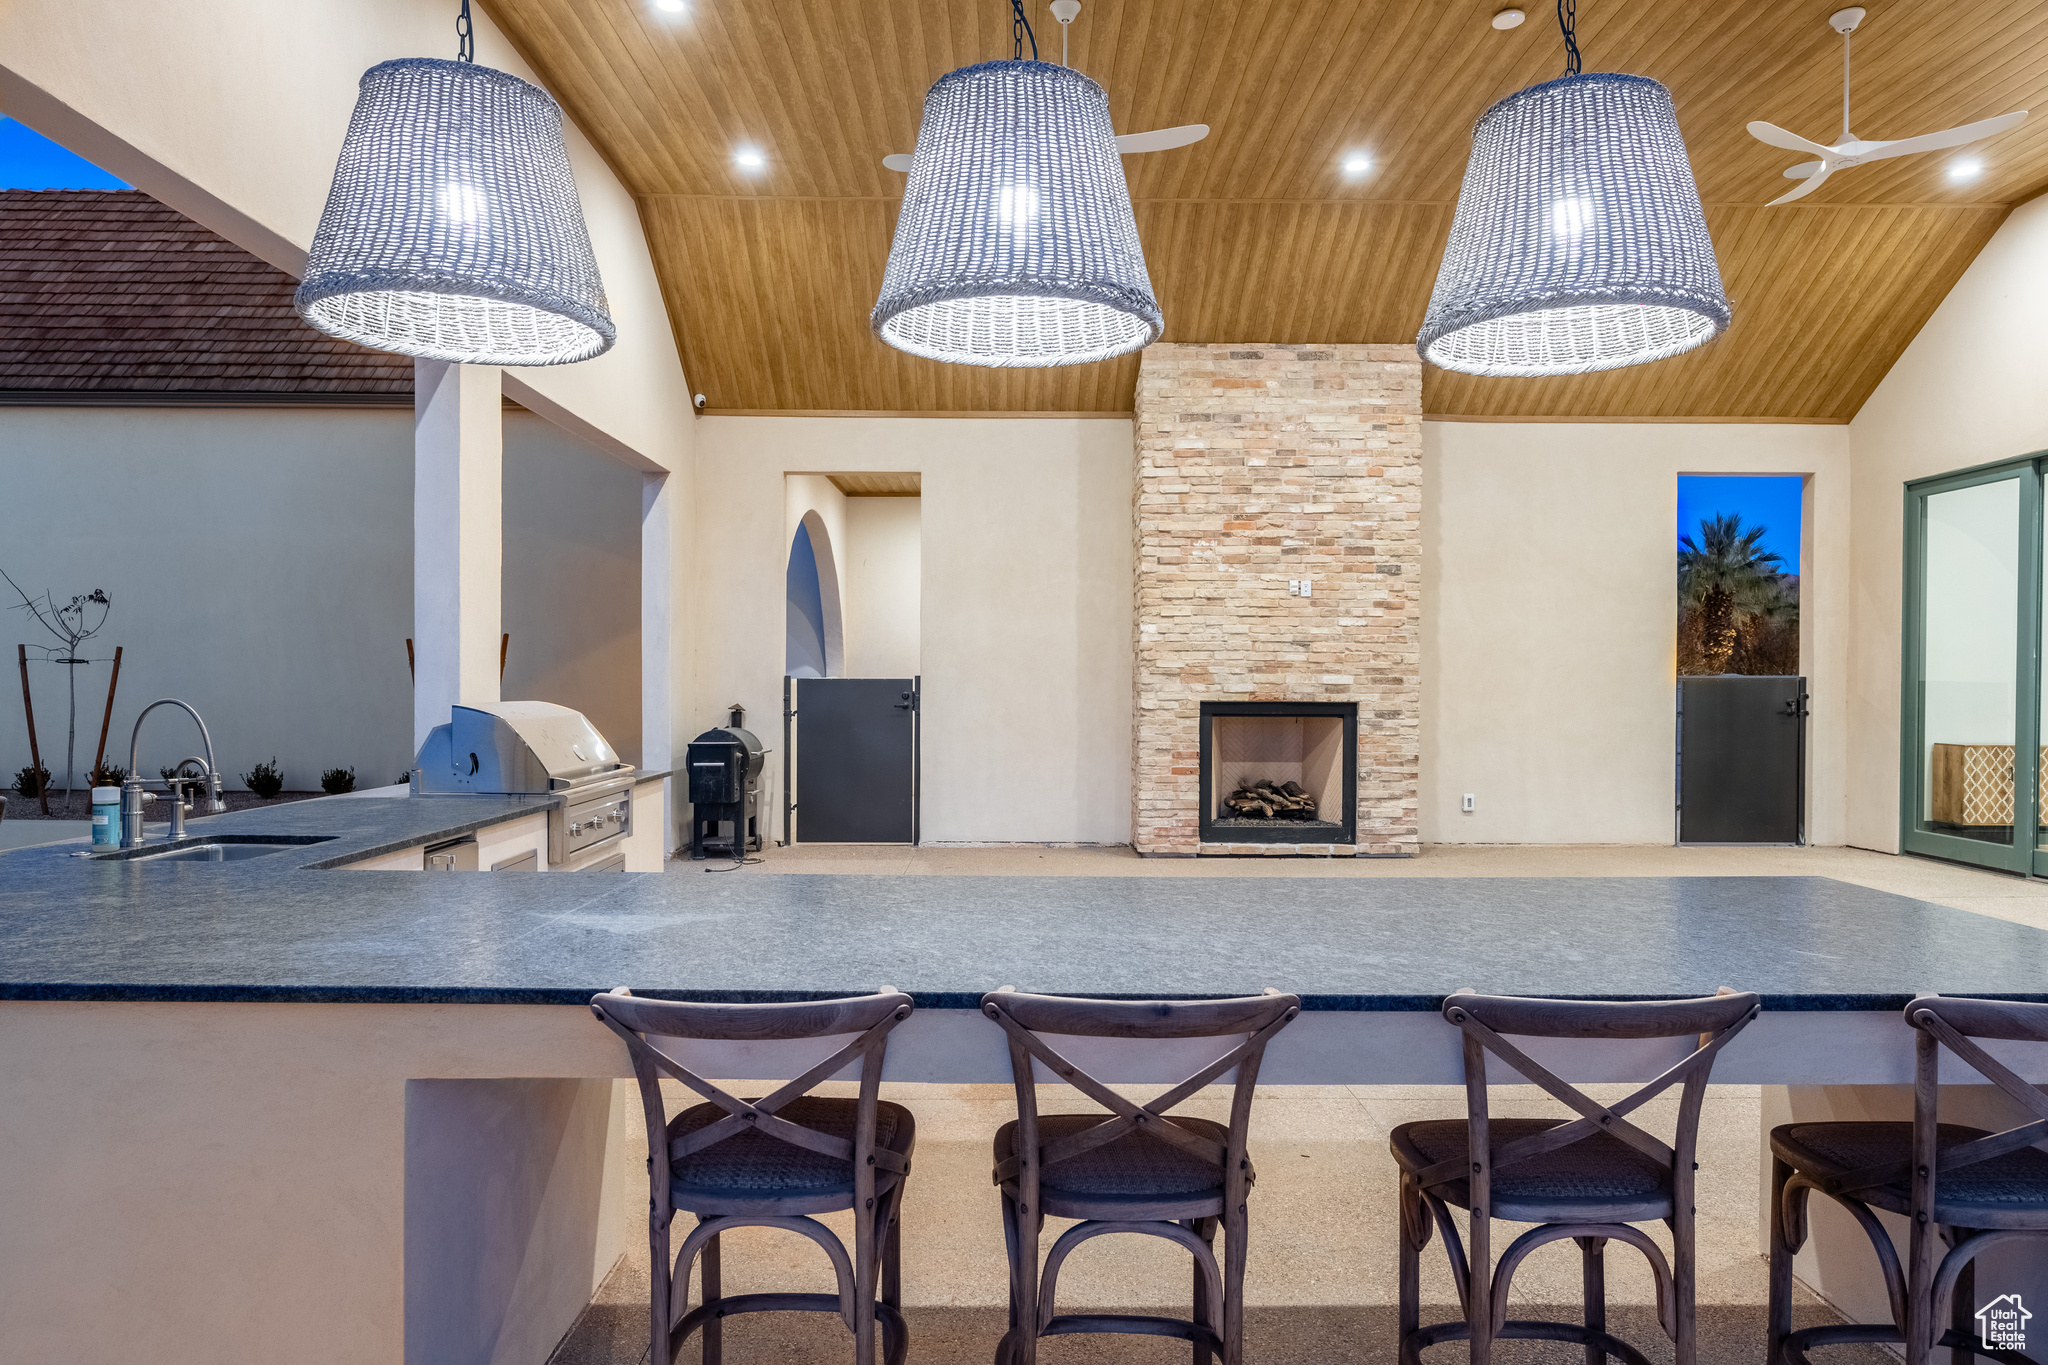 Kitchen featuring decorative light fixtures, a breakfast bar, a stone fireplace, wood ceiling, and high vaulted ceiling